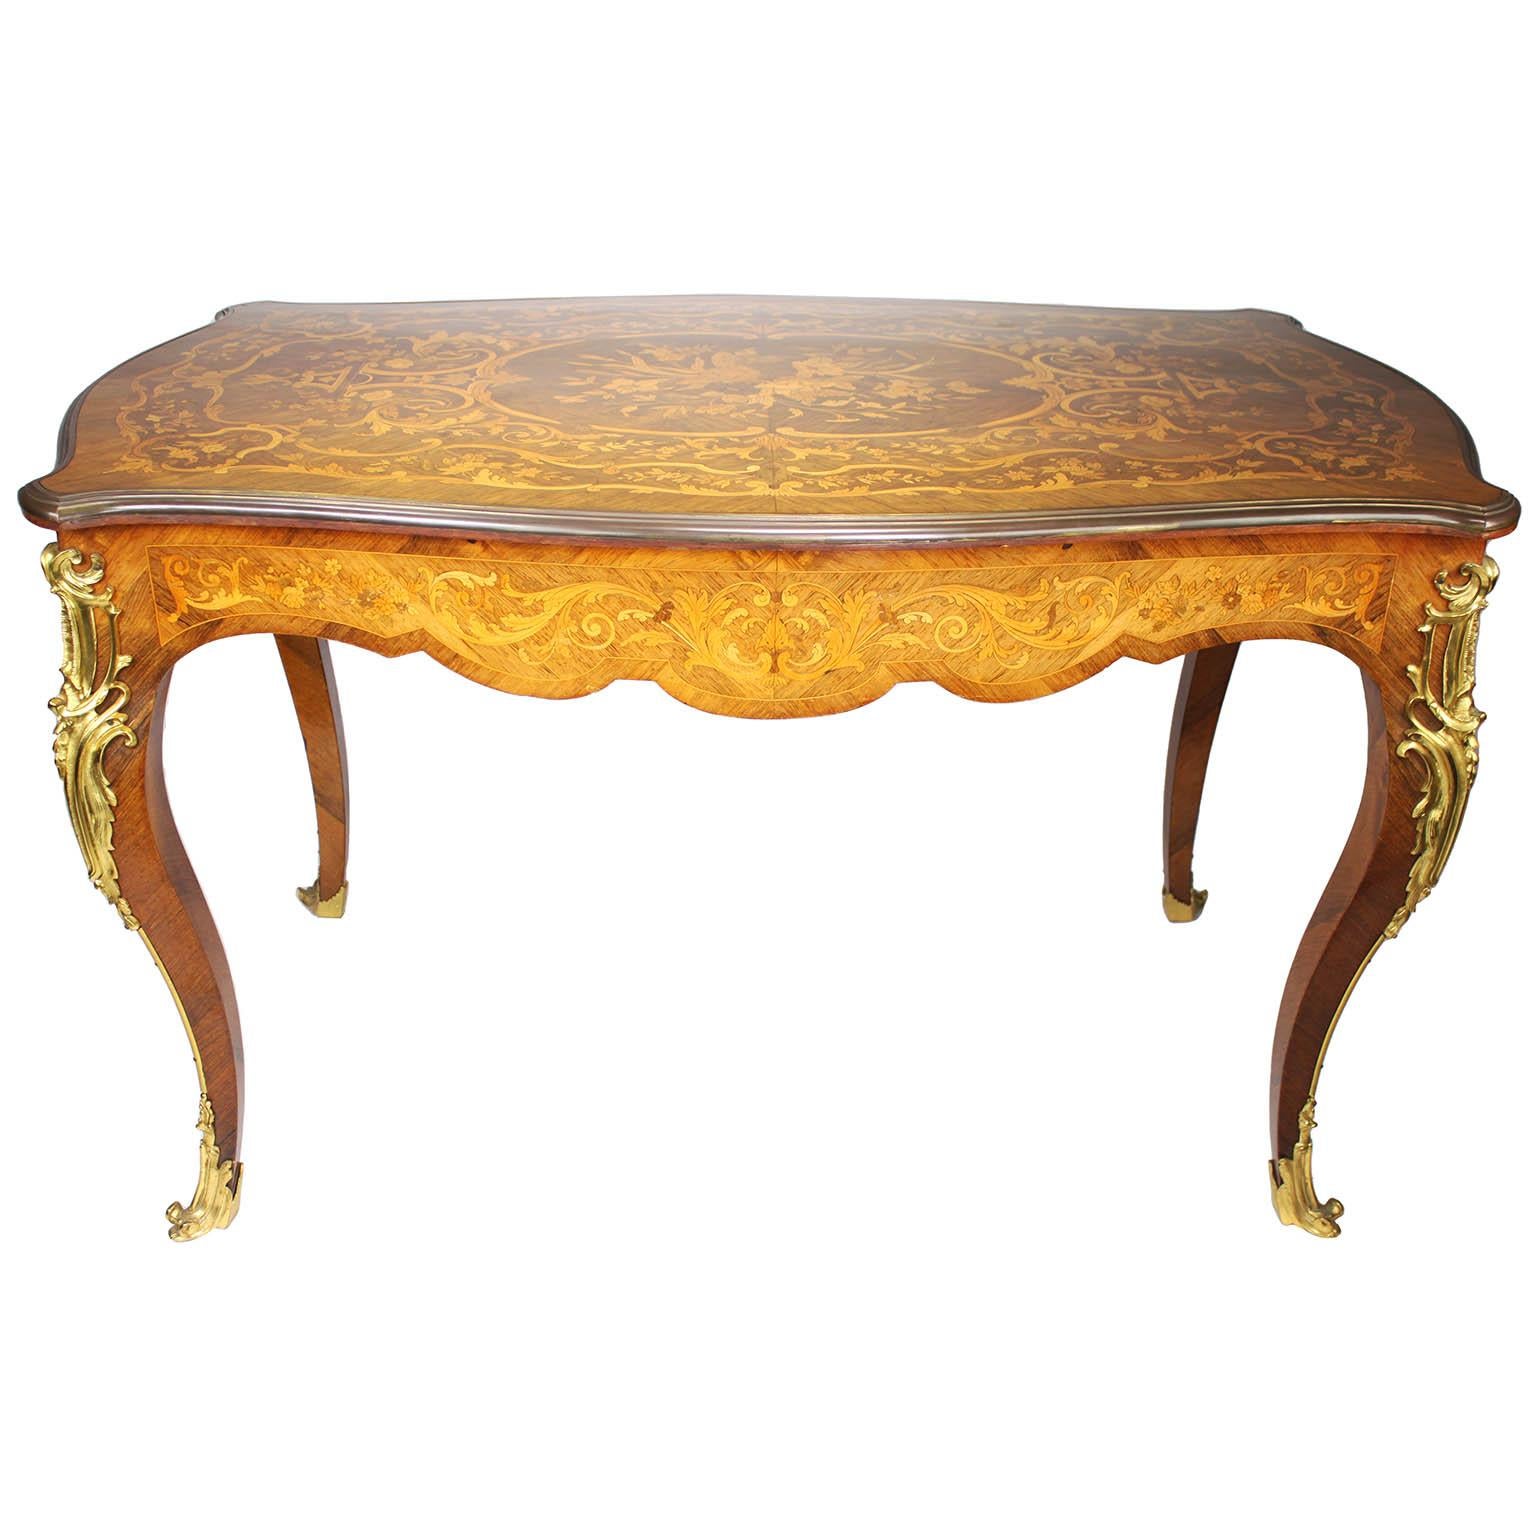 A Fine French 19th/20th Century Louis XV Style Tulipwood Marquetry and Gilt-Bronze Mounted Ladies Writing Table or Desk. The single drawer center table surmounted on each corner with ormolu mounts of leaves and acanthus, the top with an ornate